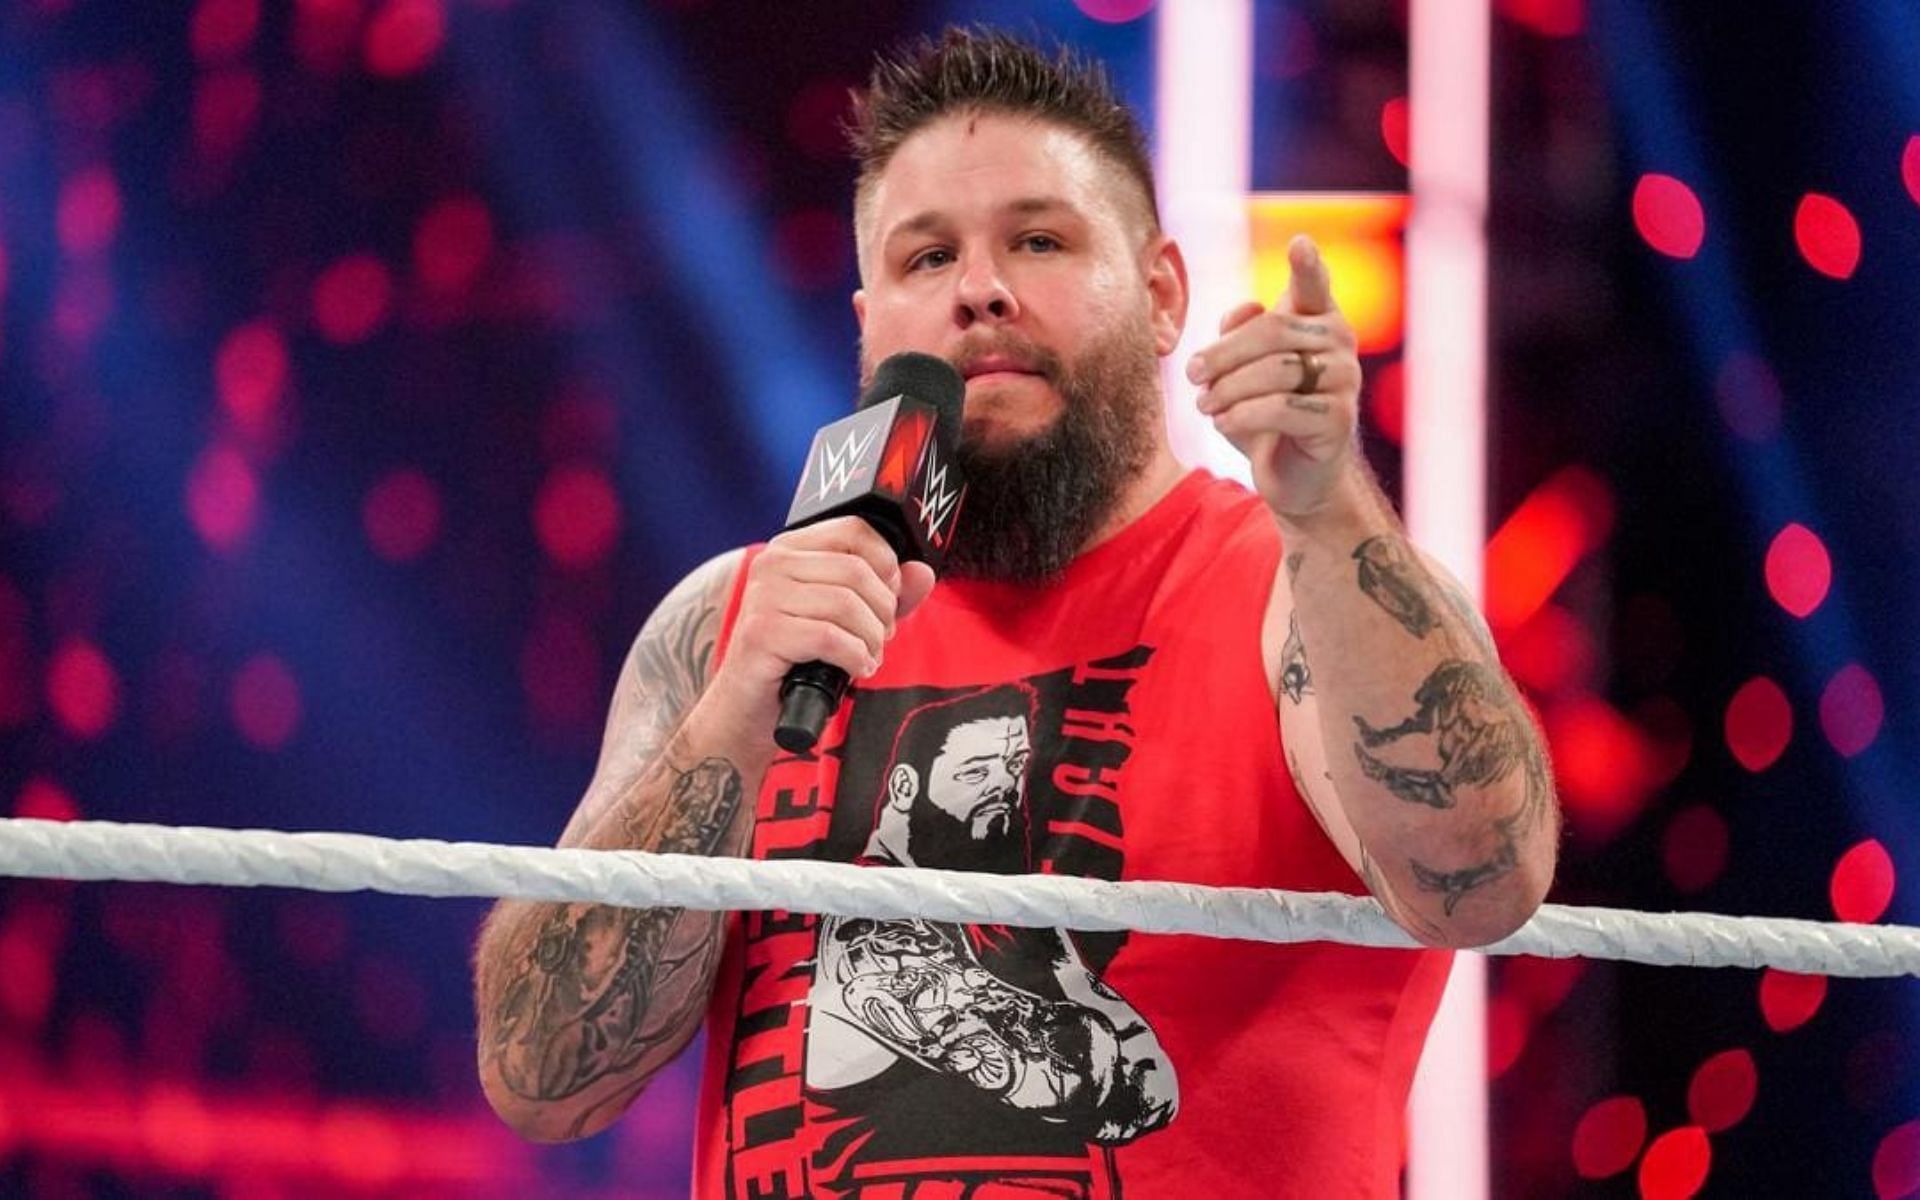 WWE RAW Superstar and former Universal Champion Kevin Owens